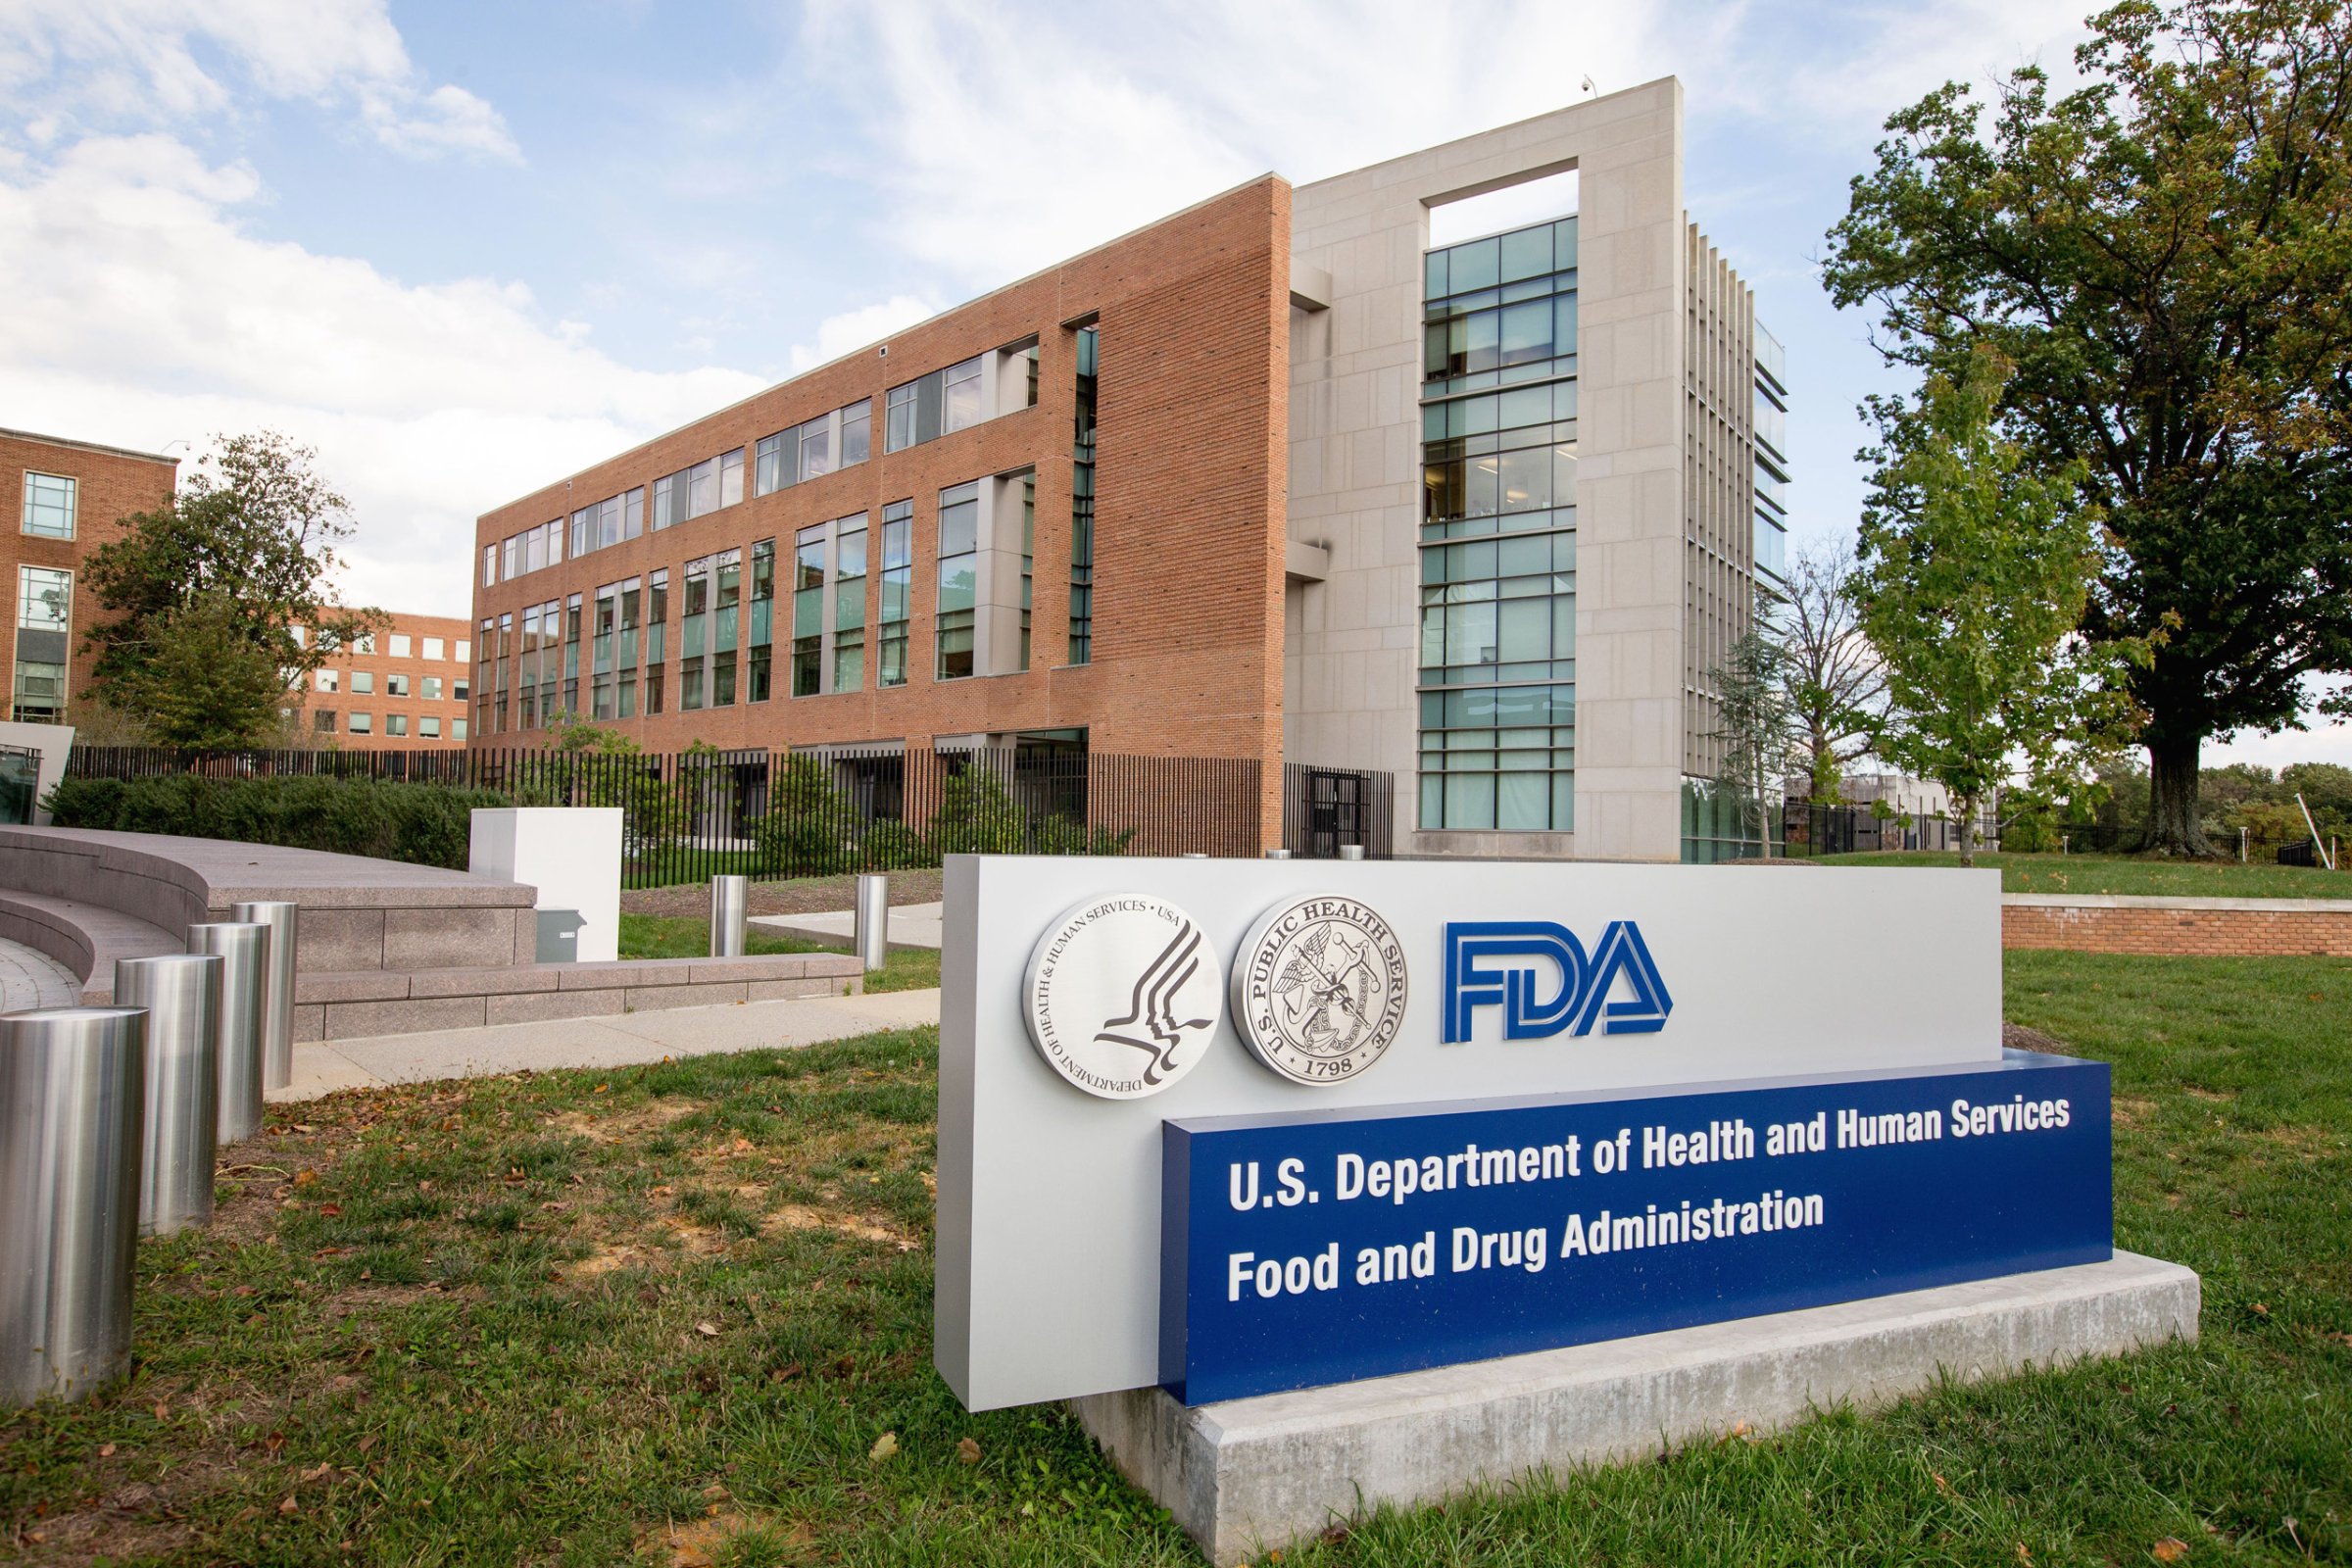 The Food and Drug Administration campus in Silver Spring, Md. on Oct. 14, 2015.